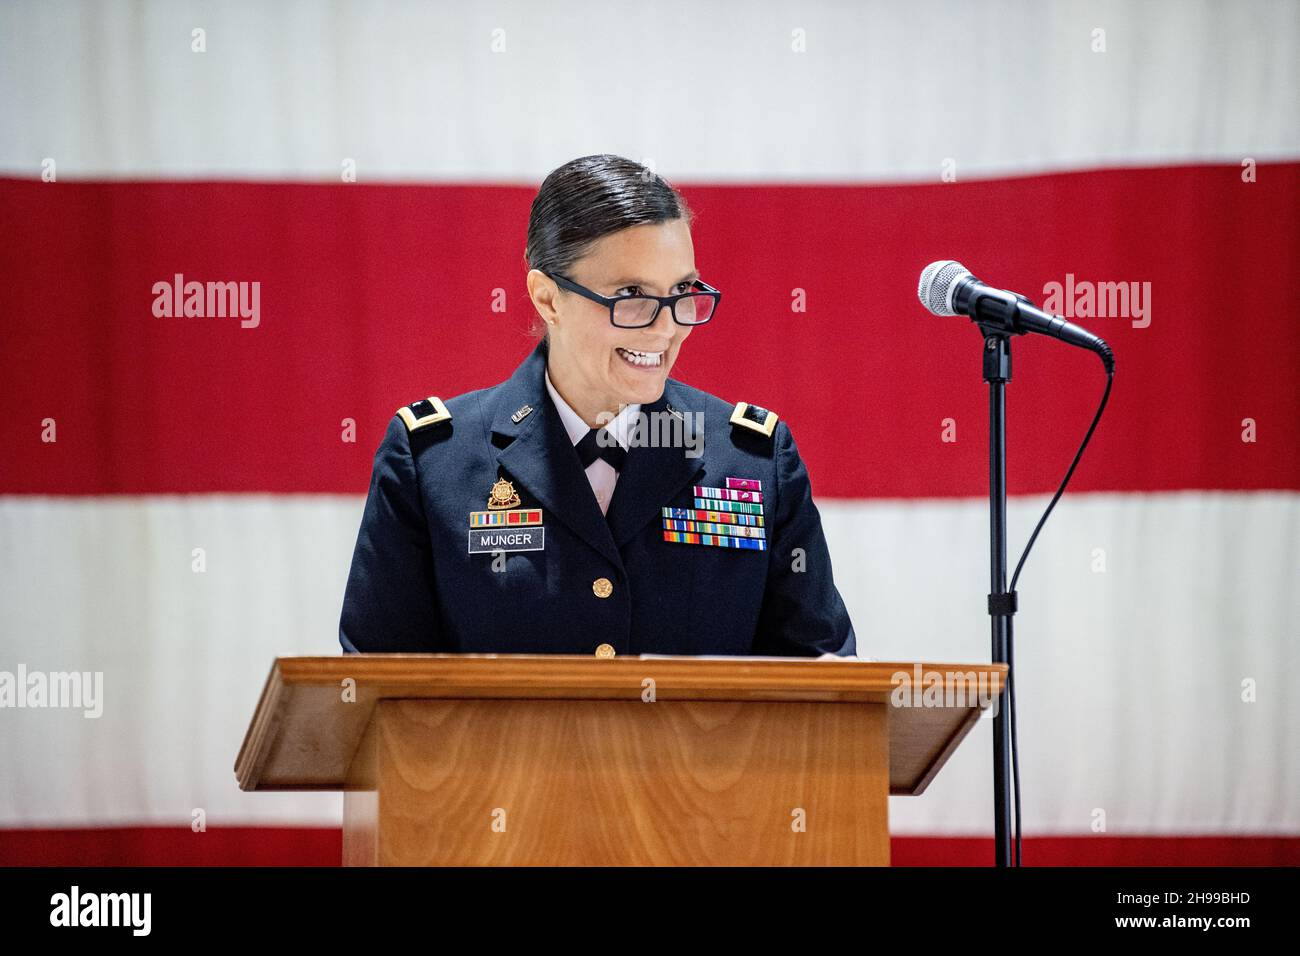 Charleston, United States. 02 December, 2021. West Virginia National Guard Col. Michaelle M. Munger addresses troops after her promotion to the rank of Brigadier General during a ceremony at Joint Forces Headquarters, December 2, 2021 in Charleston, West Virginia. Munger became the first female general officer in the history of the West Virginia Army National Guard.  Credit: Edwin L. Wriston/DOD/Alamy Live News Stock Photo